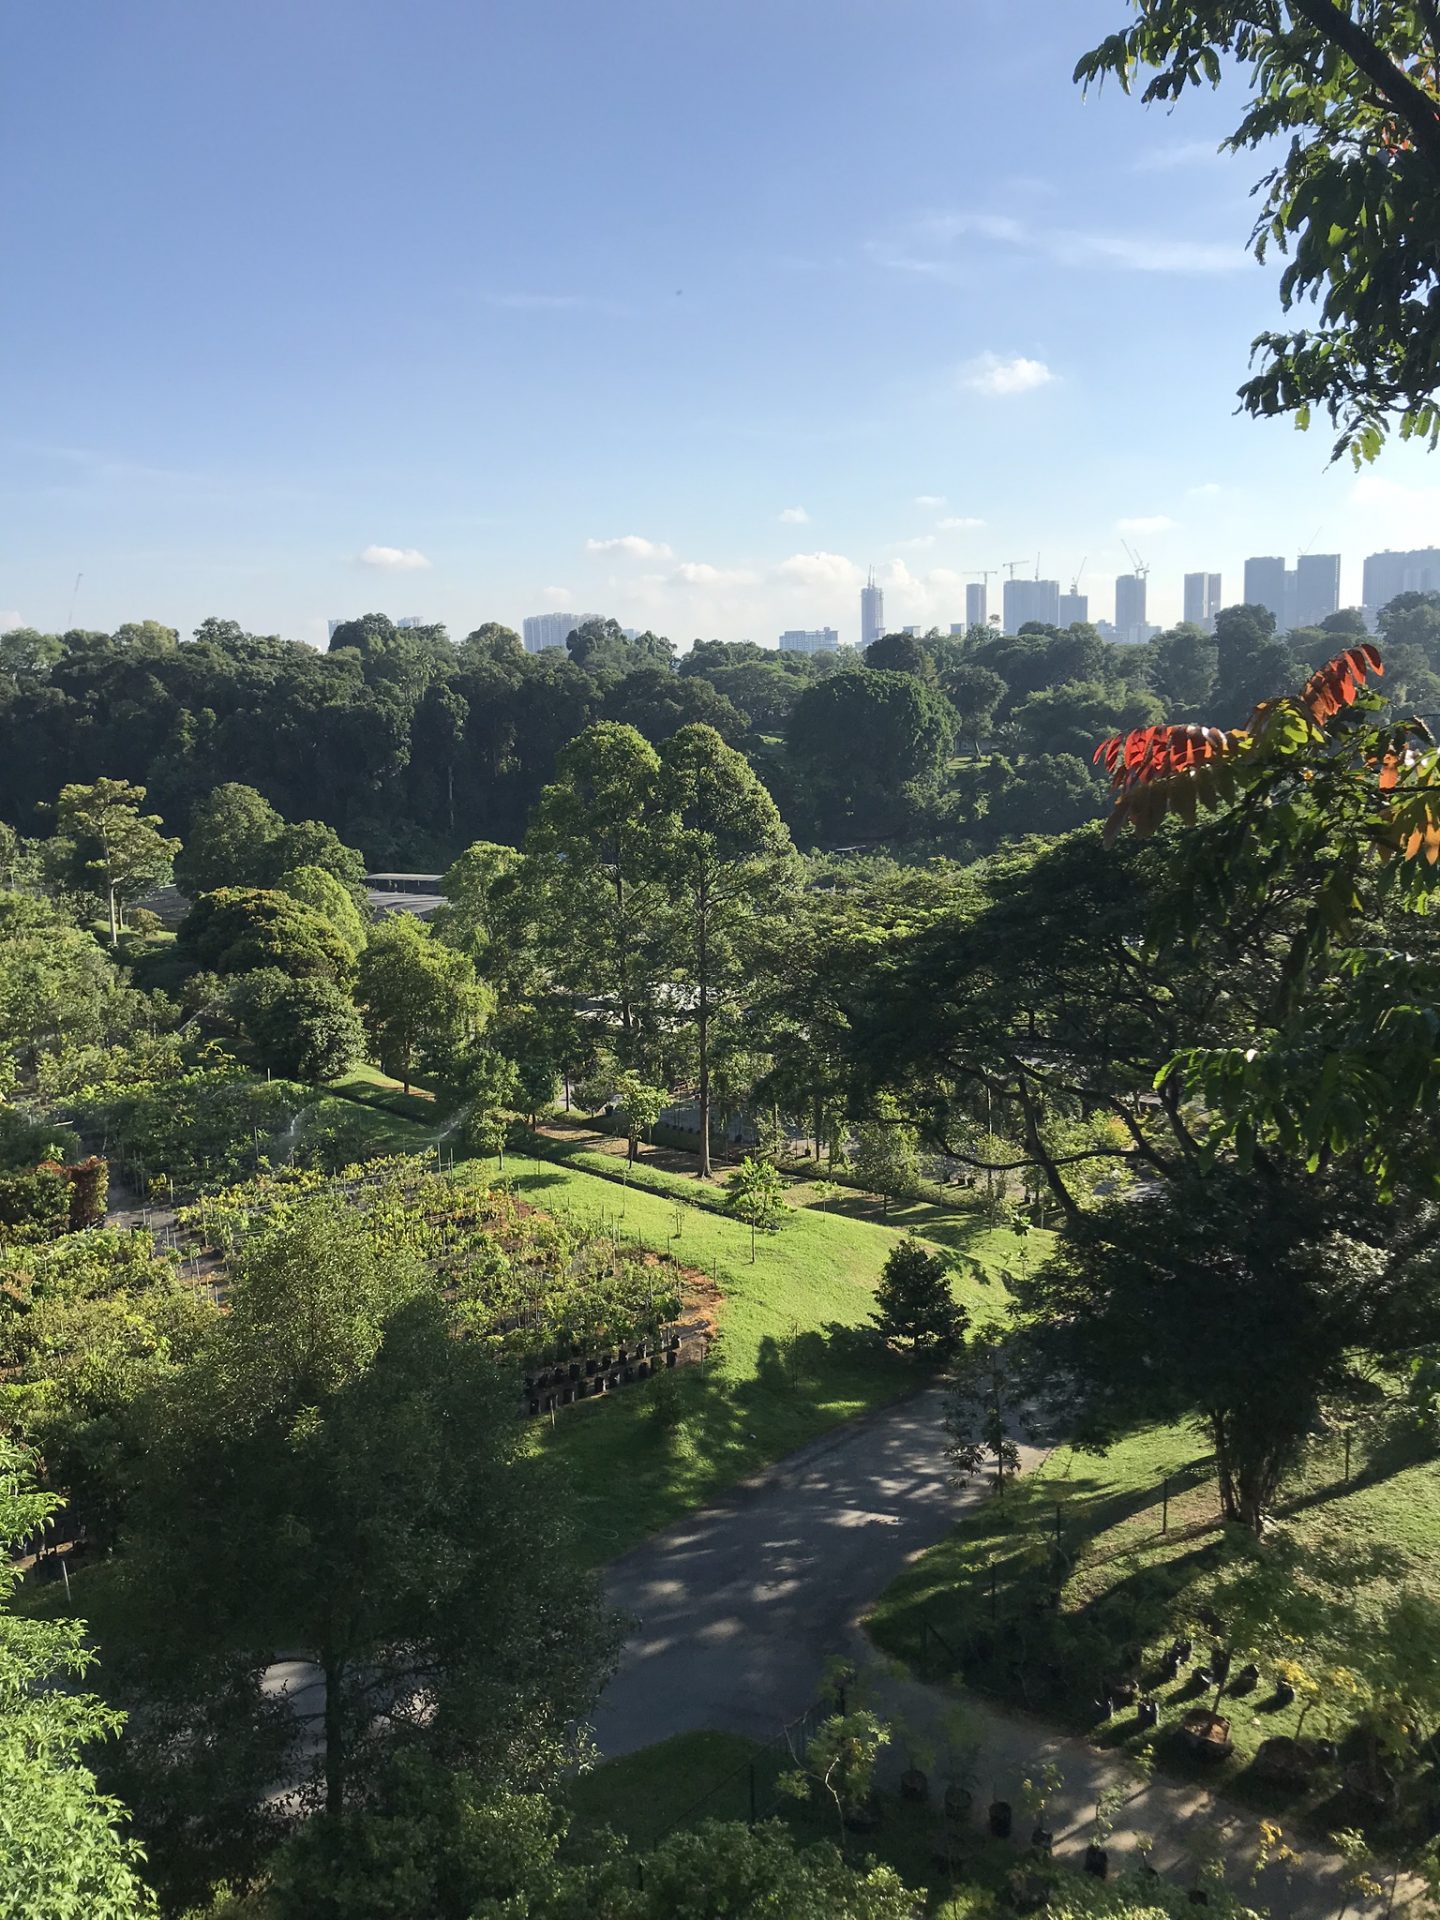 Kent Ridge Park – What to see and do with kids